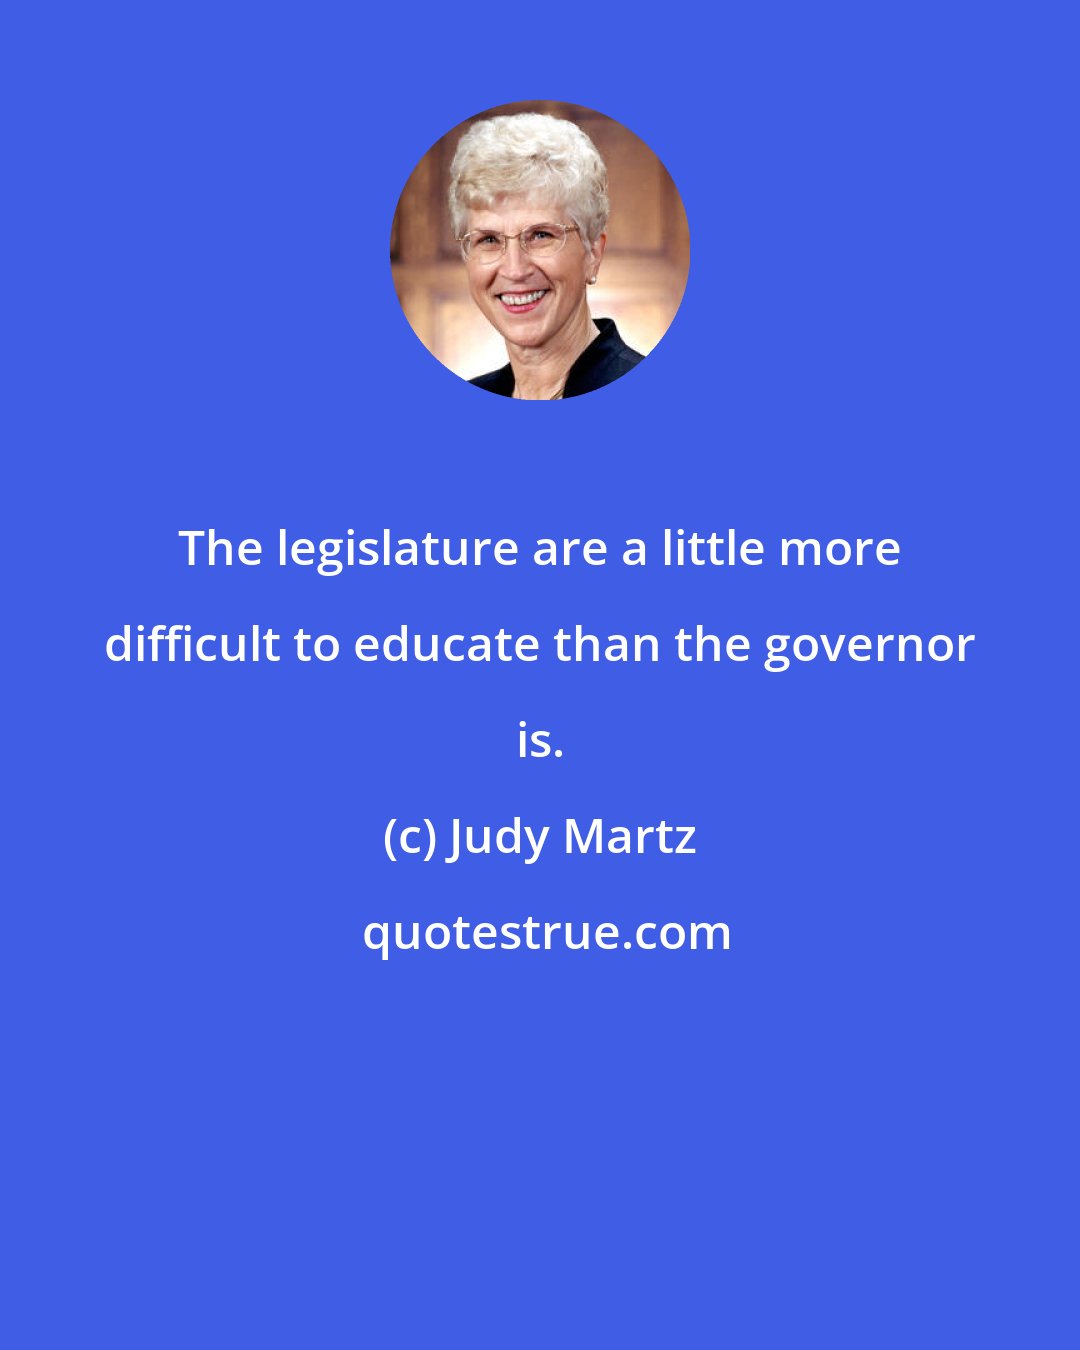 Judy Martz: The legislature are a little more difficult to educate than the governor is.